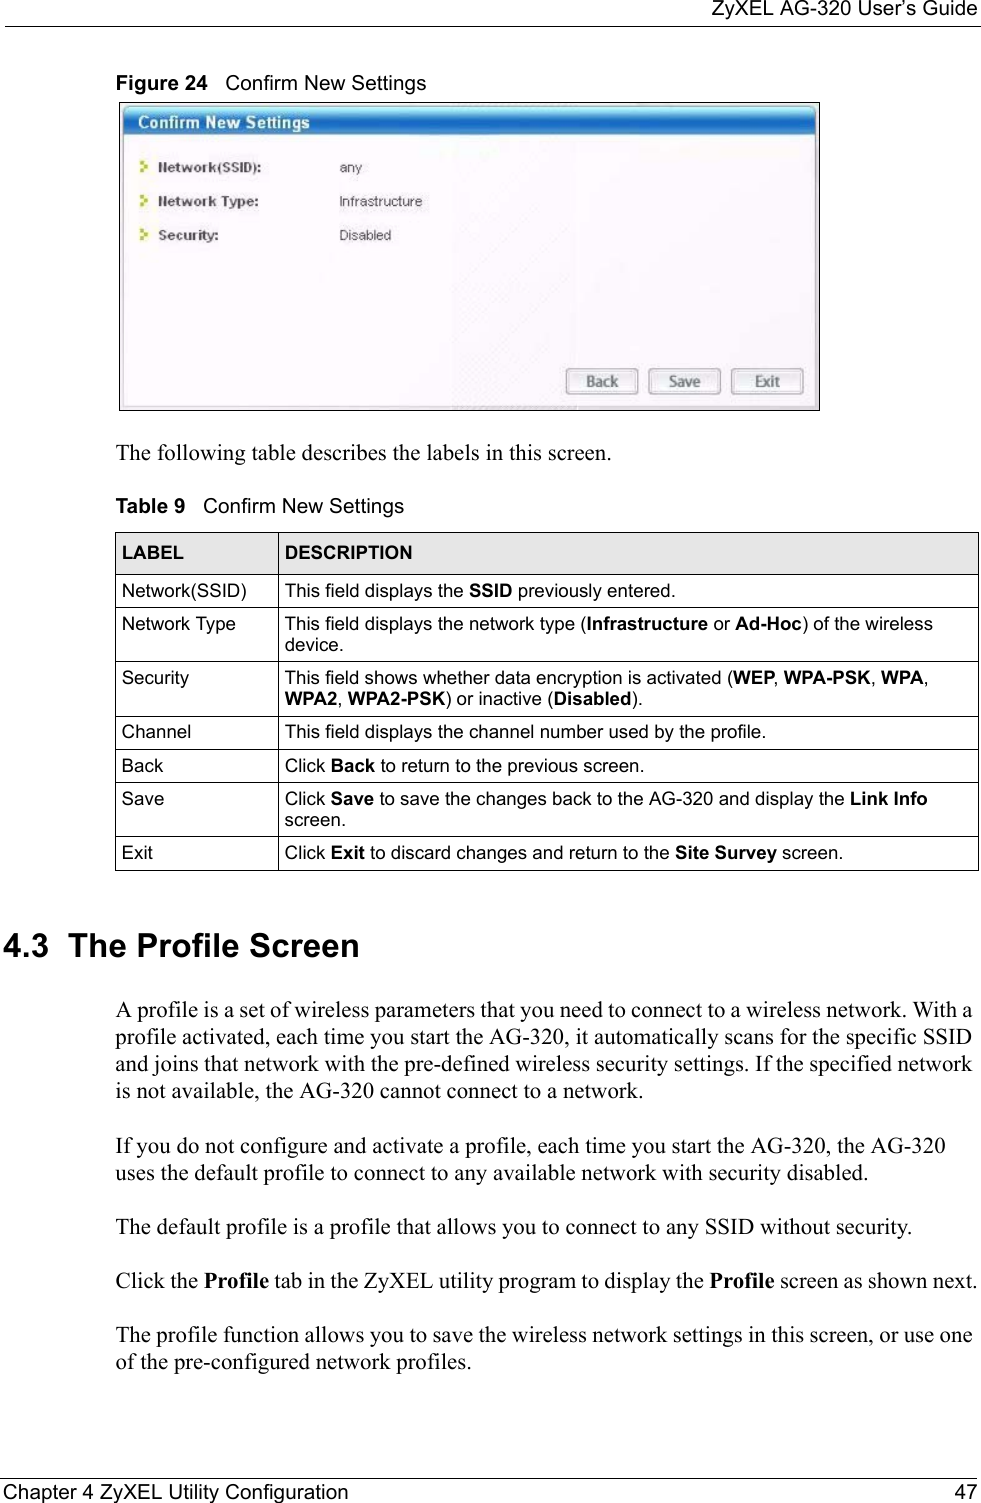 ZyXEL AG-320 User’s GuideChapter 4 ZyXEL Utility Configuration 47Figure 24   Confirm New Settings The following table describes the labels in this screen.  4.3  The Profile Screen A profile is a set of wireless parameters that you need to connect to a wireless network. With a profile activated, each time you start the AG-320, it automatically scans for the specific SSID and joins that network with the pre-defined wireless security settings. If the specified network is not available, the AG-320 cannot connect to a network.If you do not configure and activate a profile, each time you start the AG-320, the AG-320 uses the default profile to connect to any available network with security disabled. The default profile is a profile that allows you to connect to any SSID without security. Click the Profile tab in the ZyXEL utility program to display the Profile screen as shown next.The profile function allows you to save the wireless network settings in this screen, or use one of the pre-configured network profiles.Table 9   Confirm New SettingsLABEL DESCRIPTIONNetwork(SSID) This field displays the SSID previously entered.Network Type This field displays the network type (Infrastructure or Ad-Hoc) of the wireless device.Security This field shows whether data encryption is activated (WEP, WPA-PSK, WPA, WPA2, WPA2-PSK) or inactive (Disabled).Channel This field displays the channel number used by the profile.Back Click Back to return to the previous screen.Save Click Save to save the changes back to the AG-320 and display the Link Info screen. Exit Click Exit to discard changes and return to the Site Survey screen.